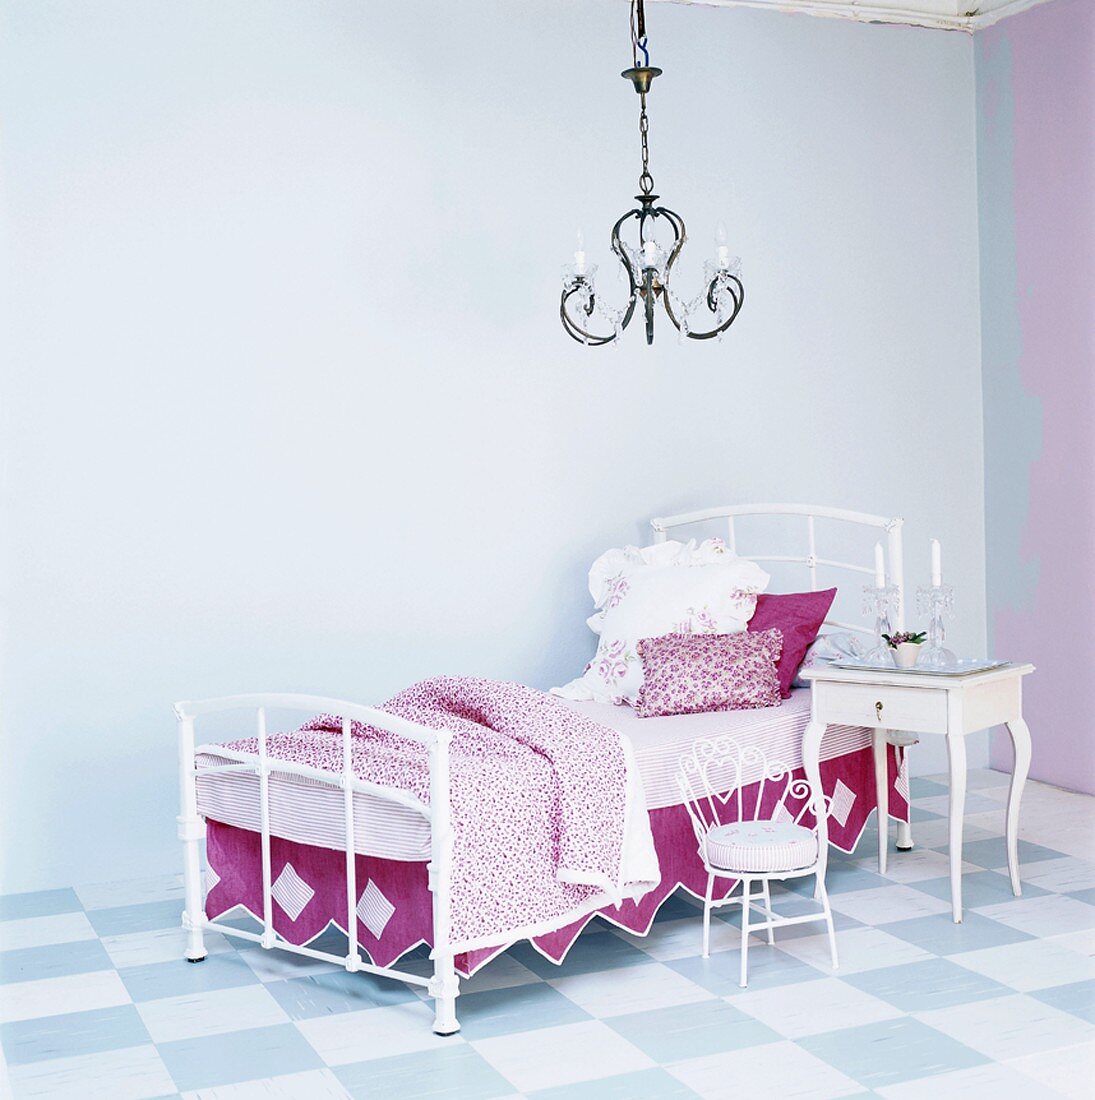 Bed with bedside table, small chair and a chandelier